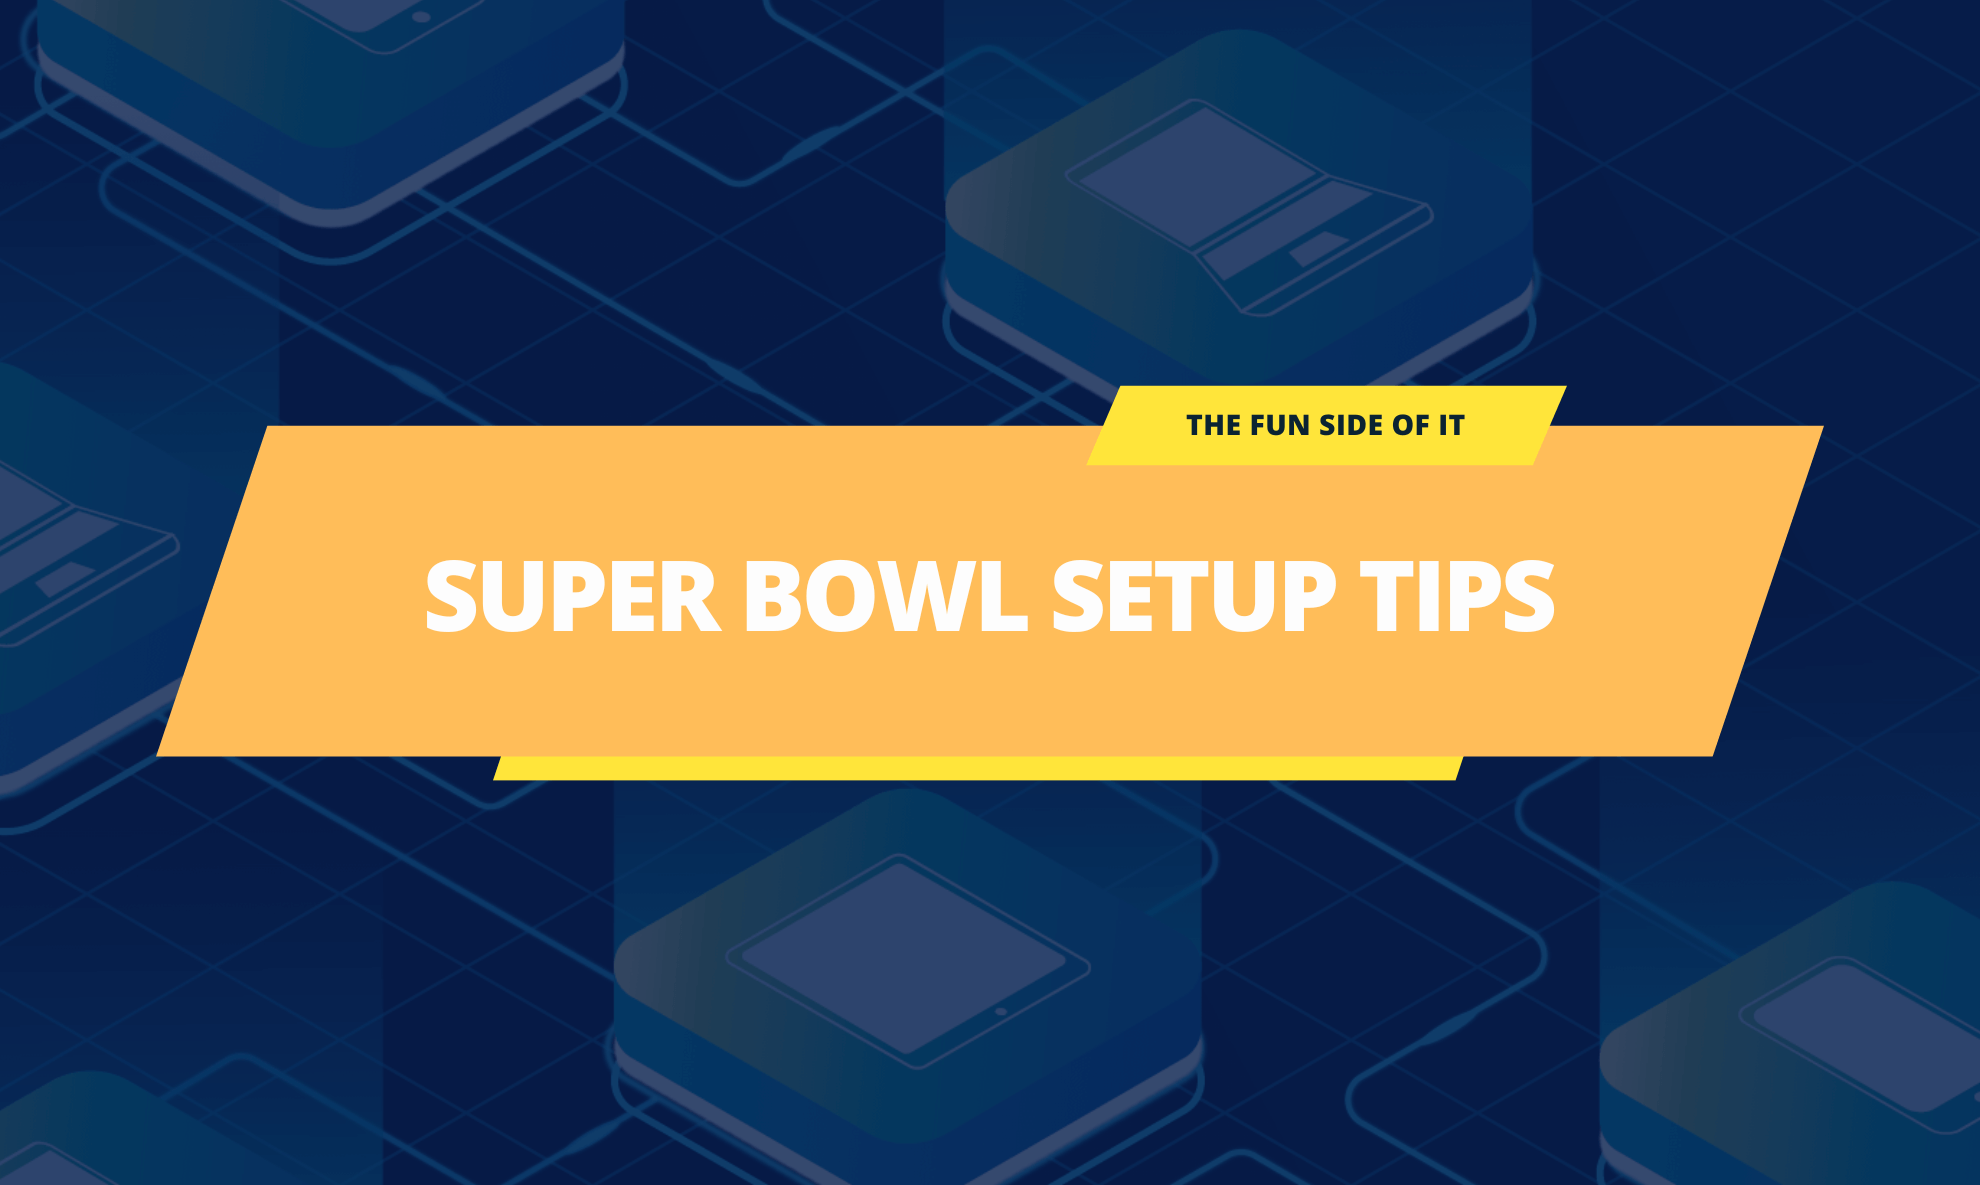 Device and Network Setup Tips for Super Bowl Party Success